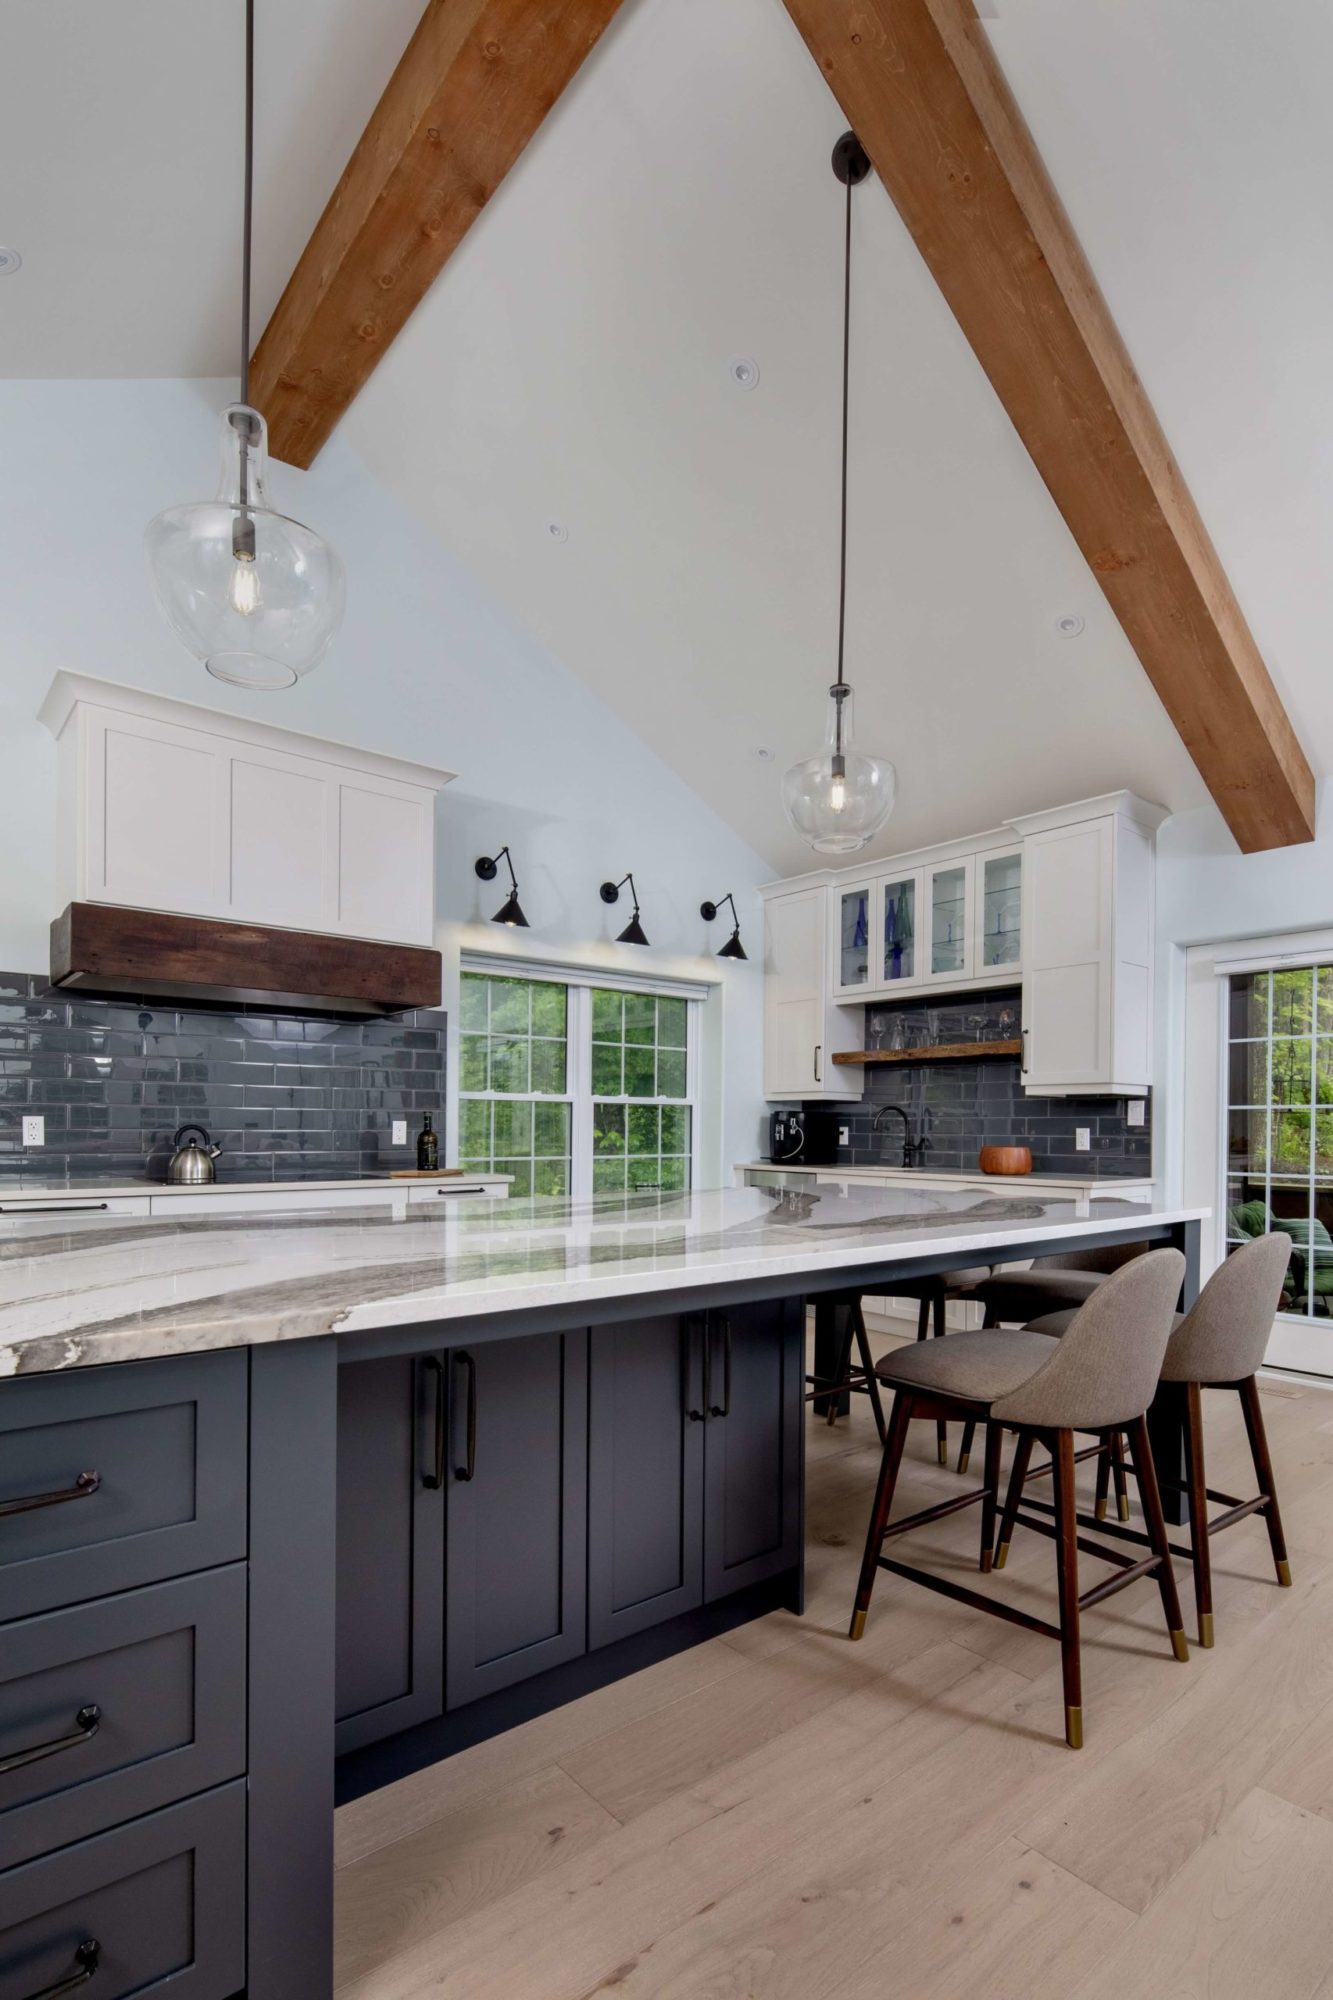 Interior of a kitchen inside a custom home in Southern Ontario